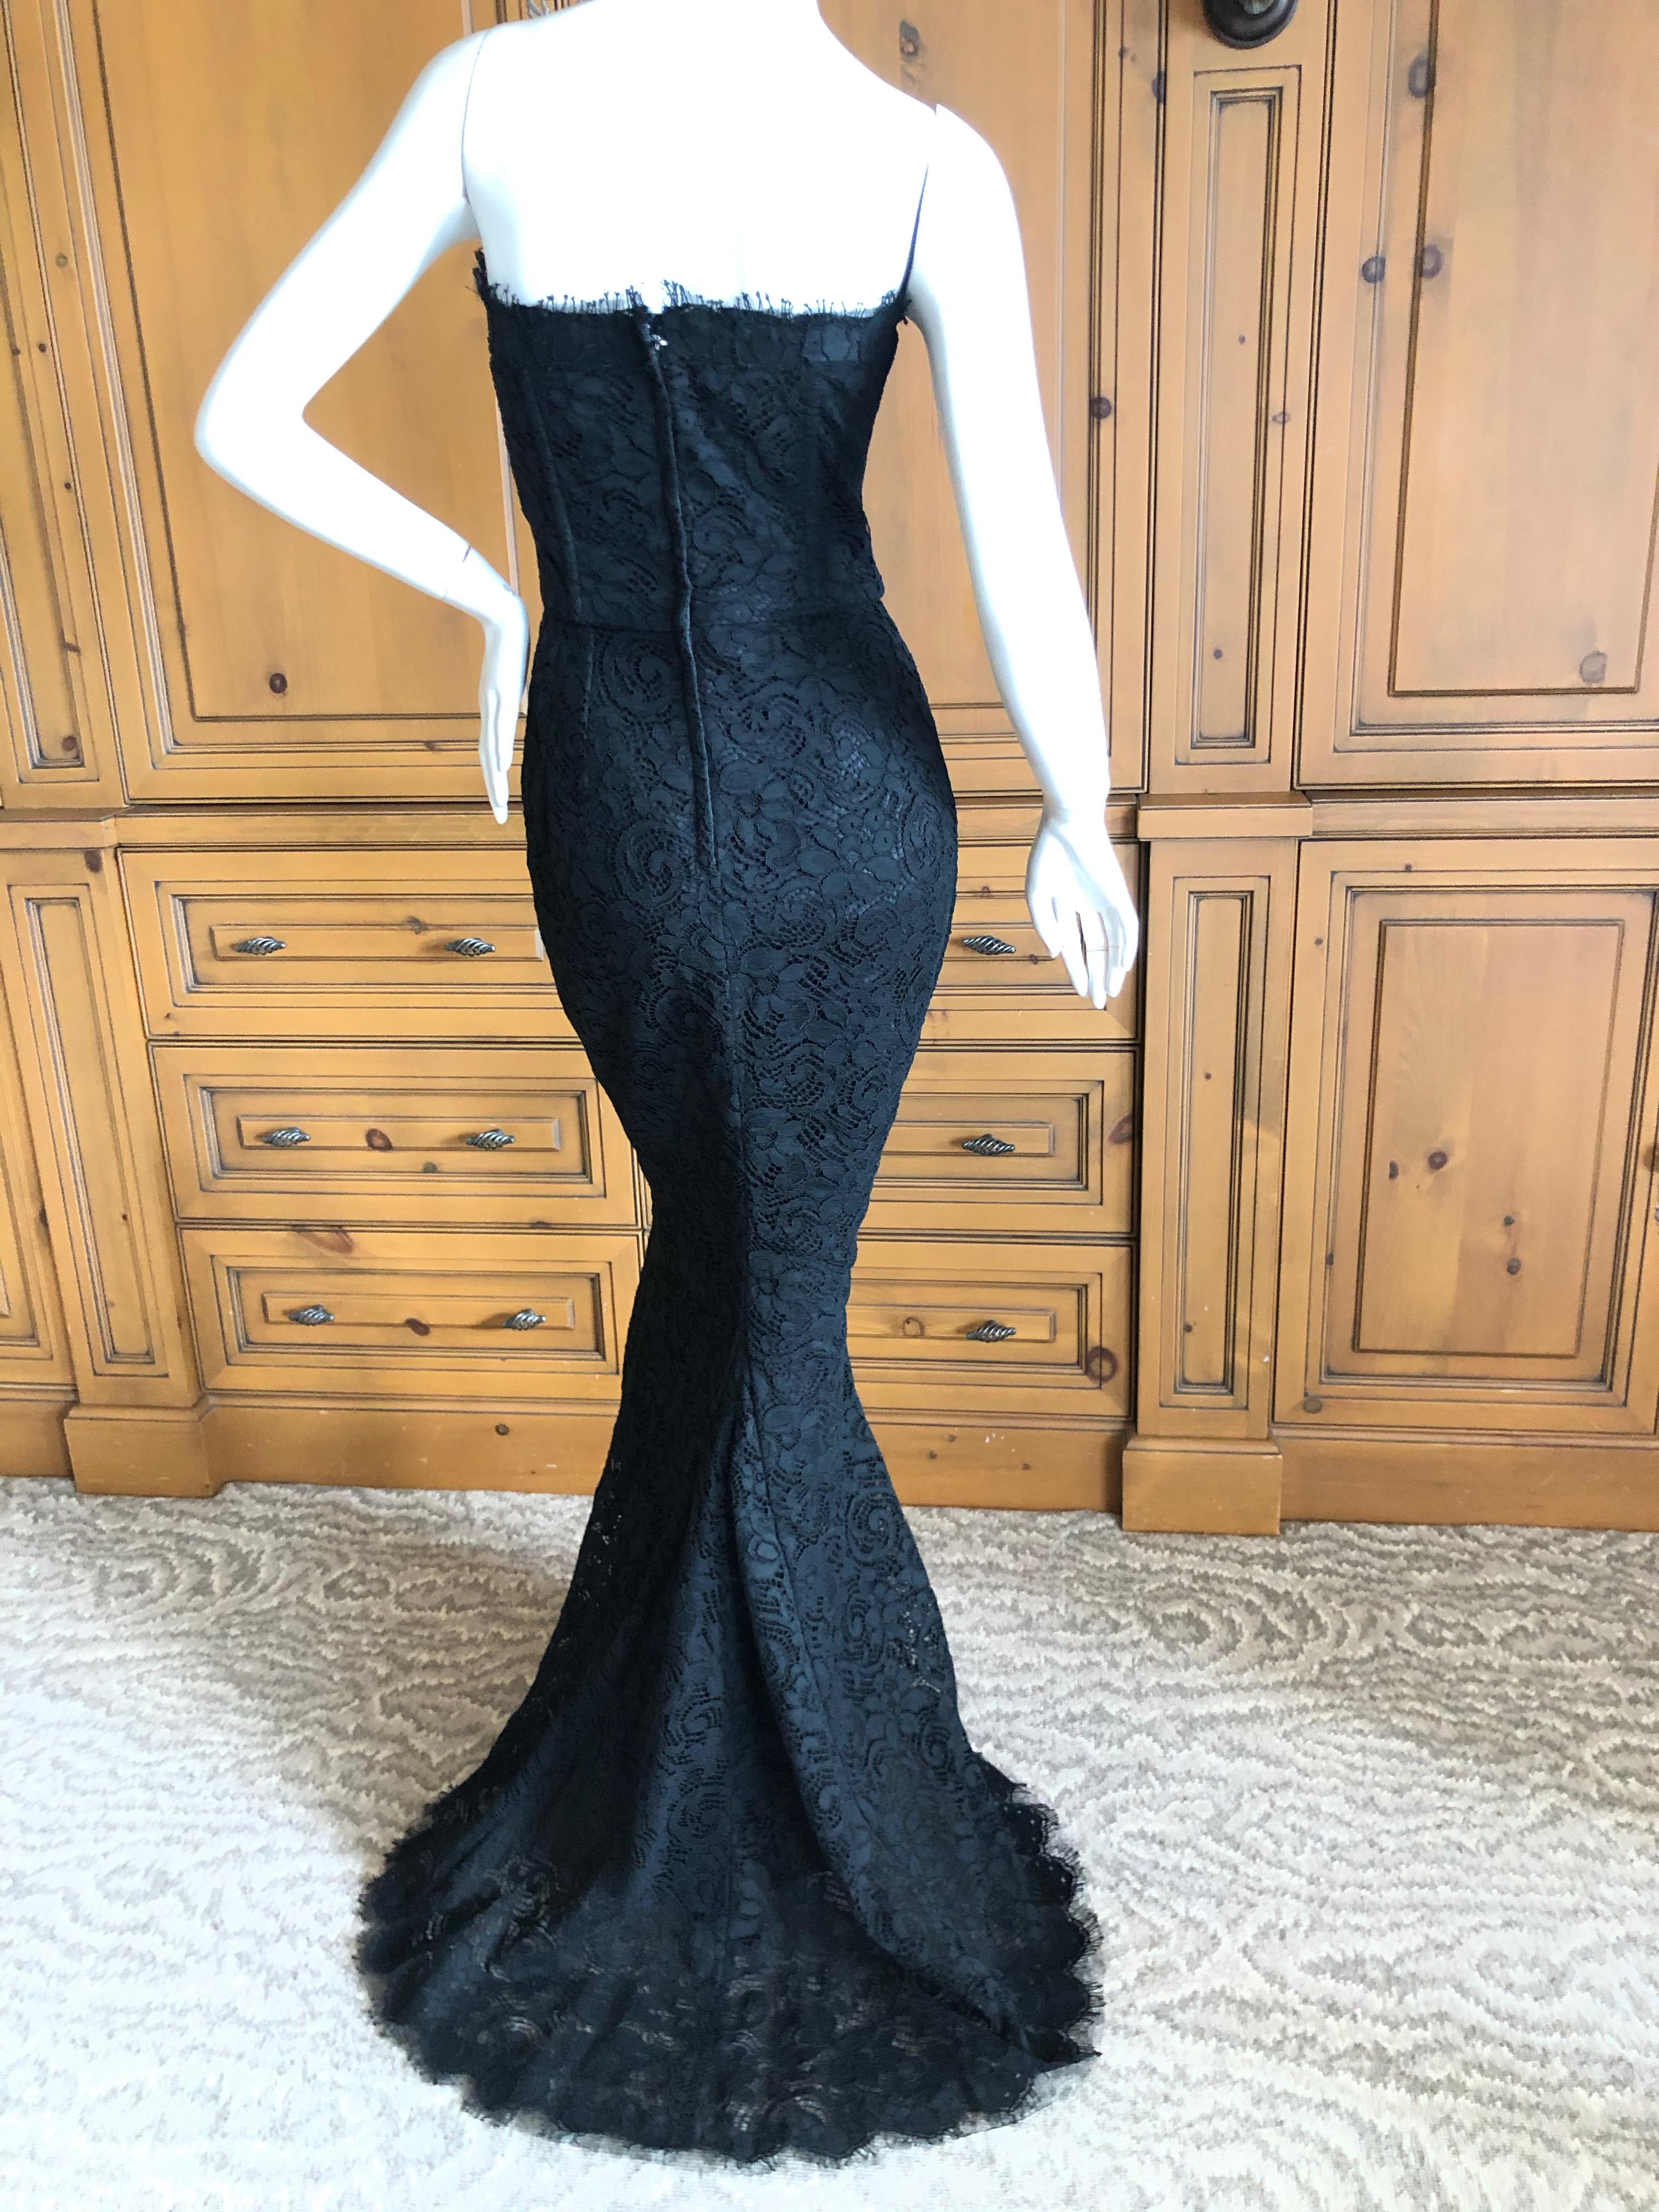 Dolce & Gabbana Vintage Black Lace Corseted Strapless Evening Gown  For Sale 3